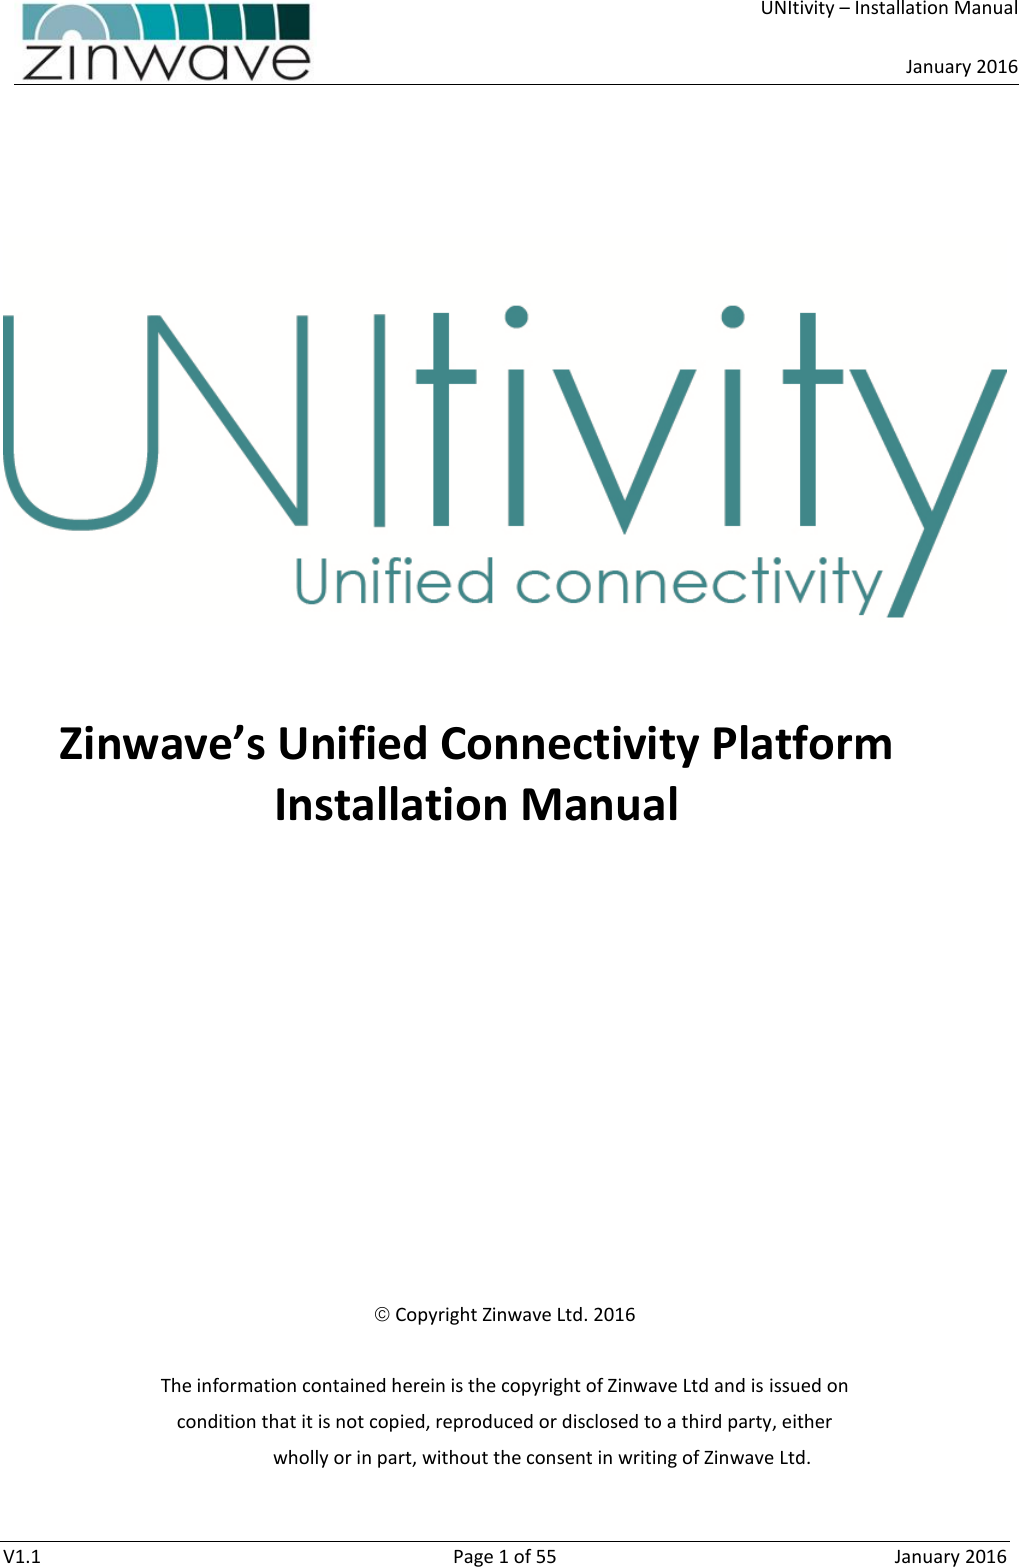     UNItivity – Installation Manual      January 2016  V1.1  Page 1 of 55  January 2016         Zinwave’s Unified Connectivity Platform  Installation Manual              Copyright Zinwave Ltd. 2016  The information contained herein is the copyright of Zinwave Ltd and is issued on condition that it is not copied, reproduced or disclosed to a third party, either   wholly or in part, without the consent in writing of Zinwave Ltd.  